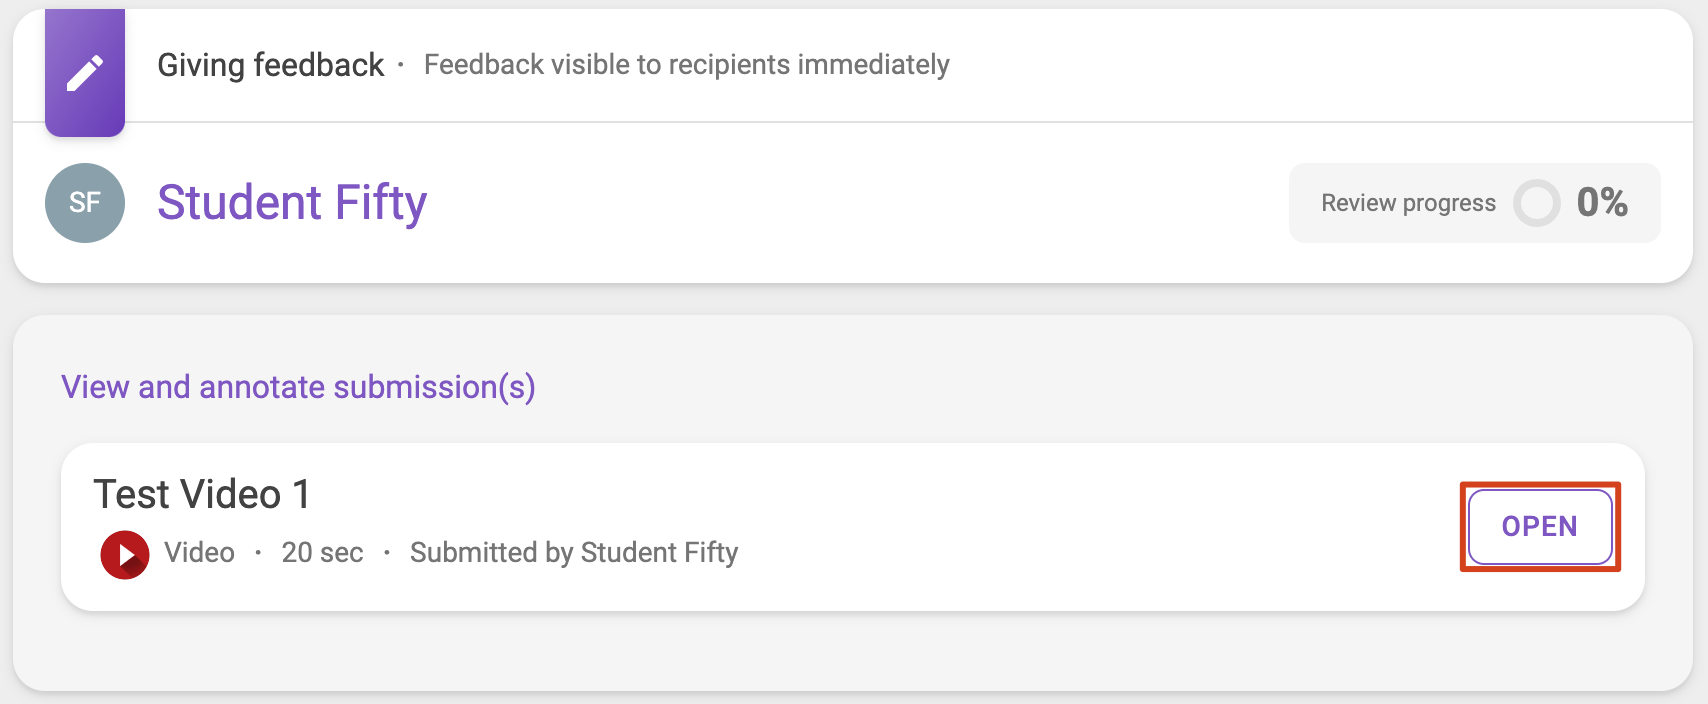 The student’s feedback workflow page gives staff an overview of the student’s submission and feedback